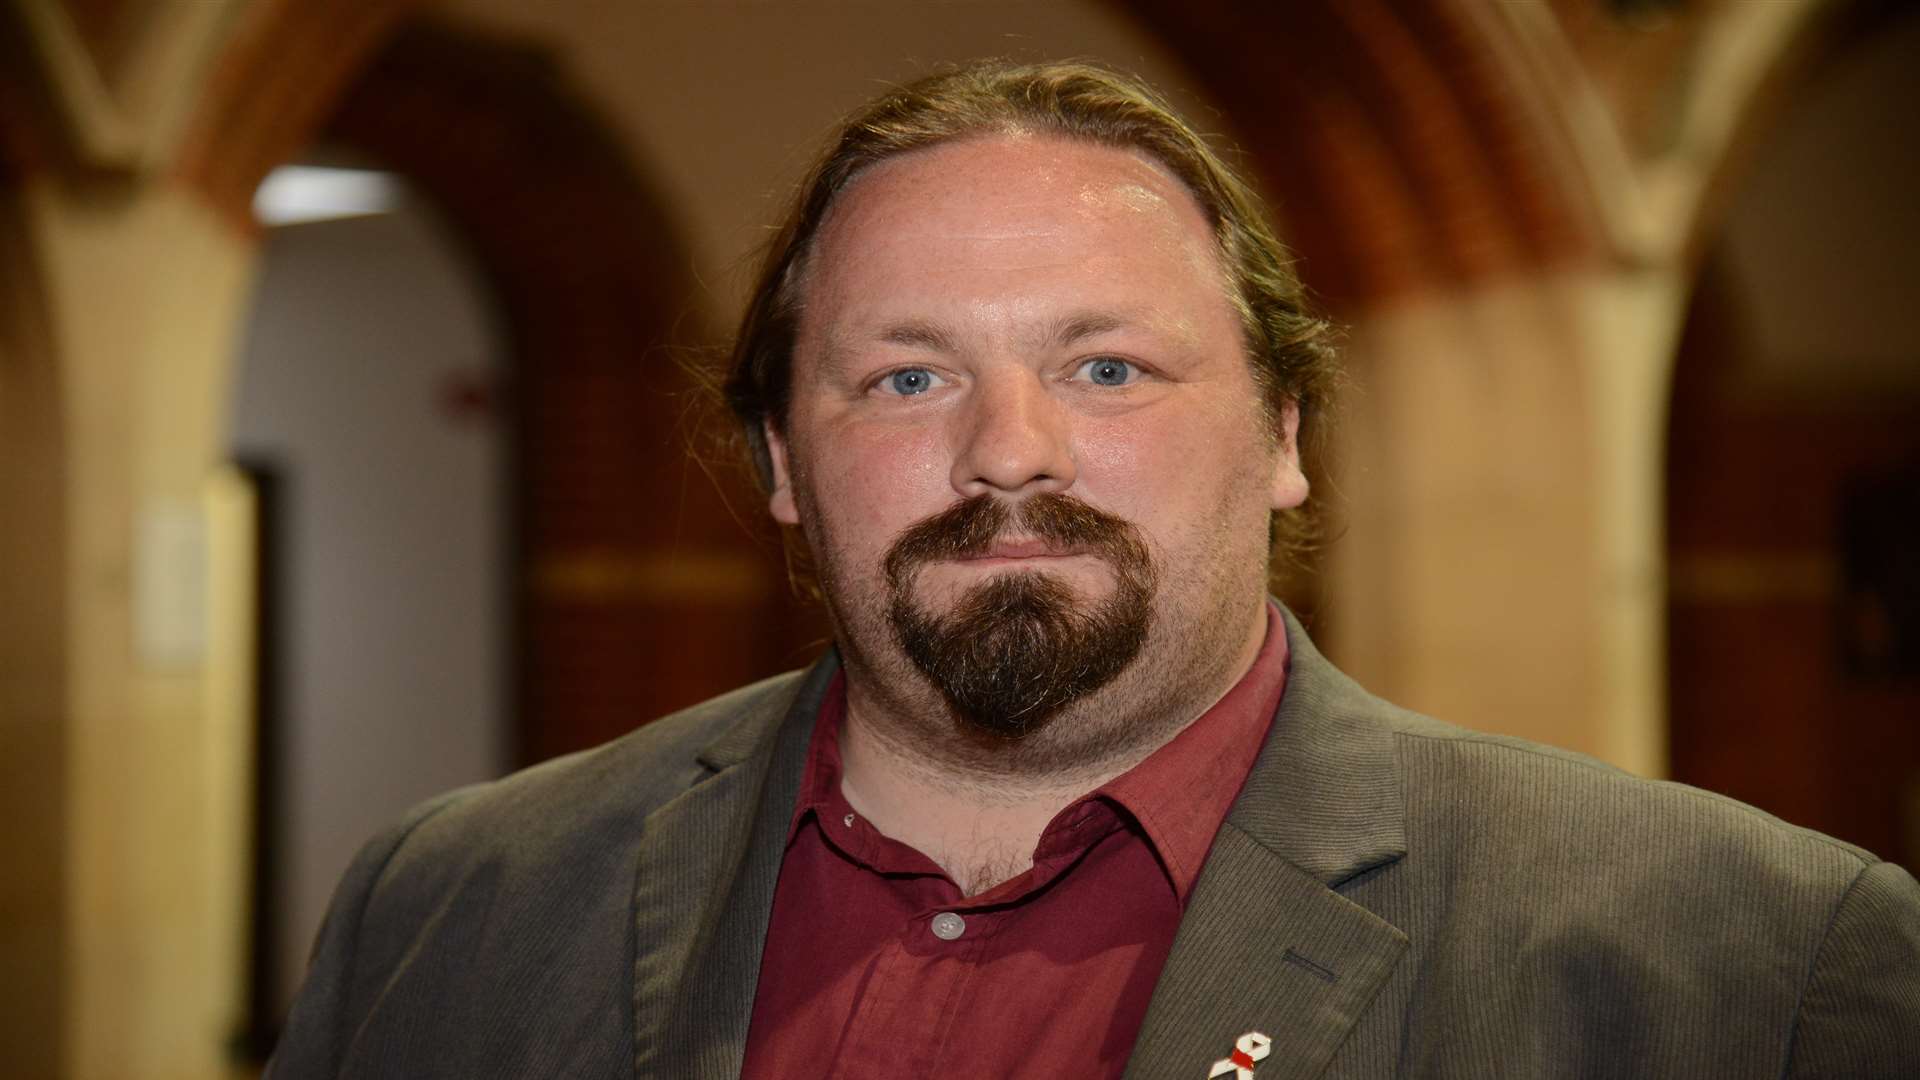 Cllr Vince Maple, Leader of Medway Labour Group